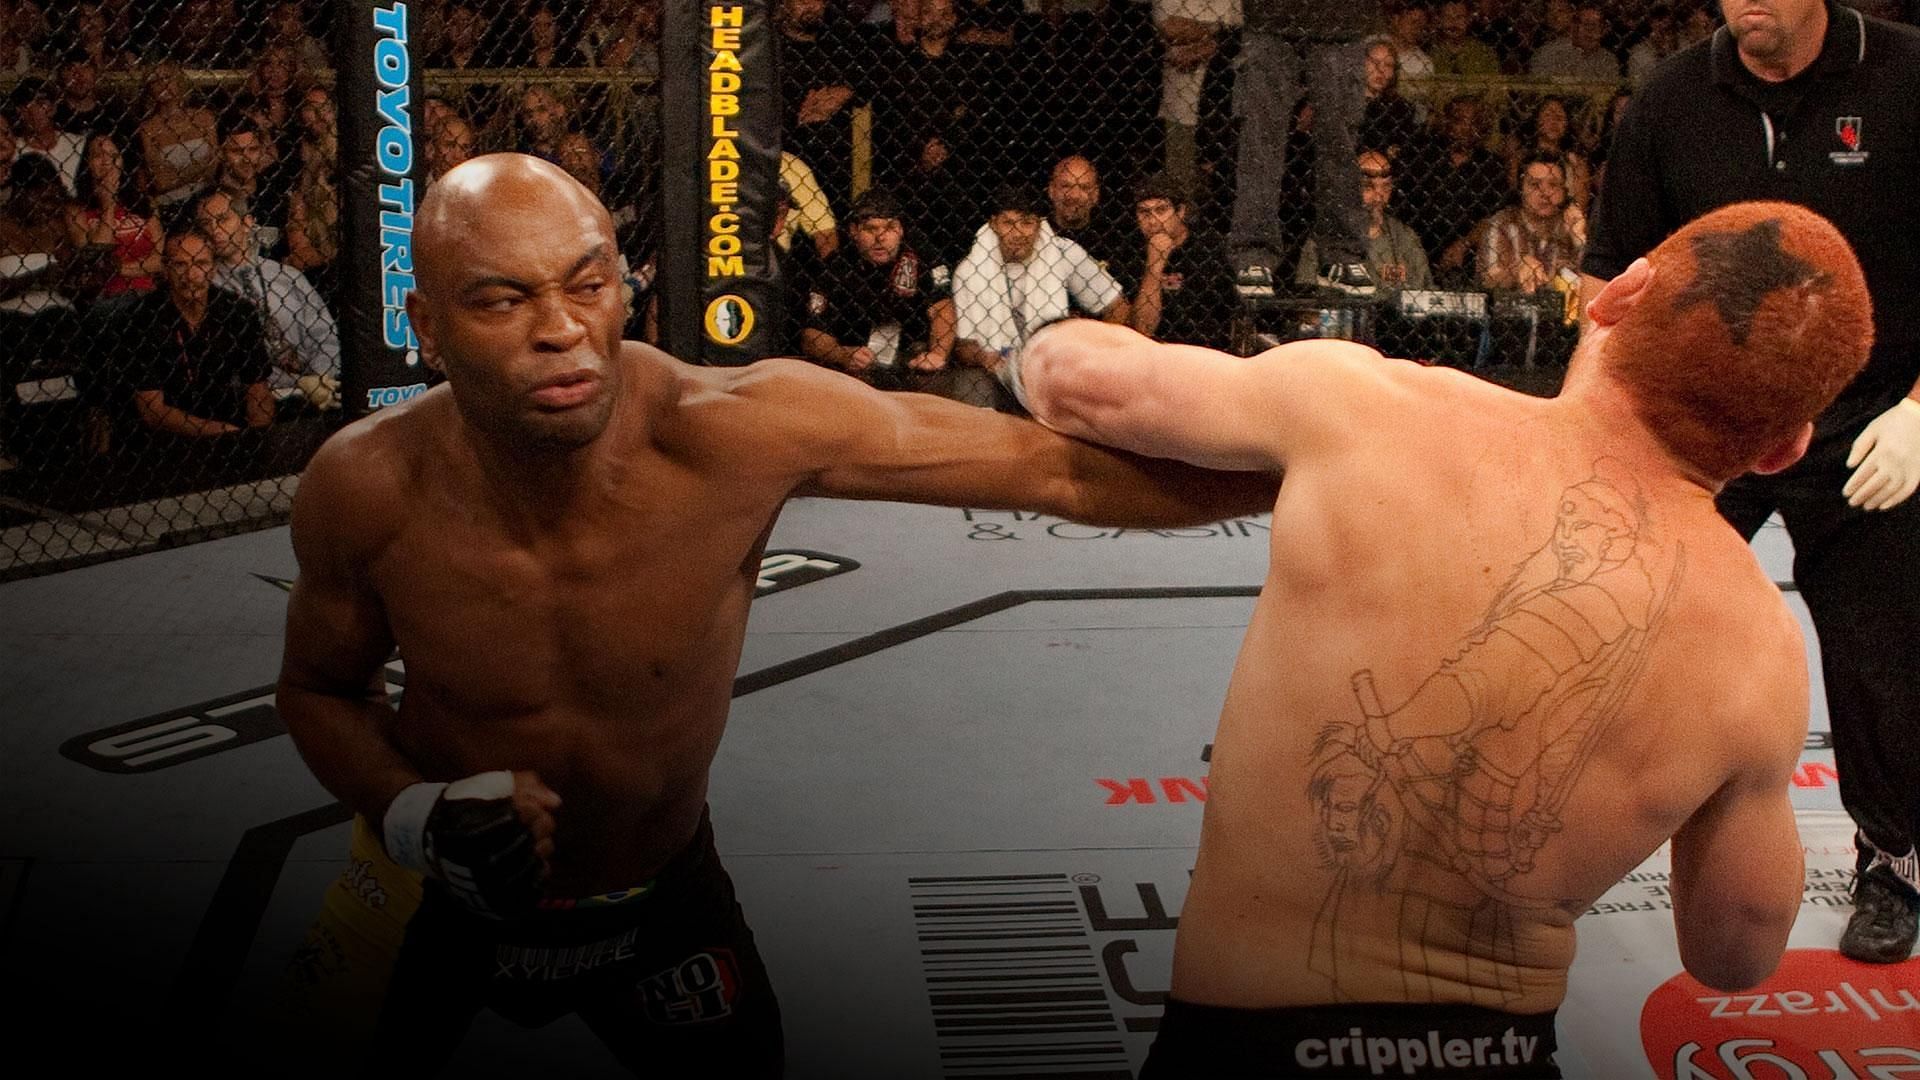 Practically every strike that Anderson Silva threw against Chris Leben landed cleanly